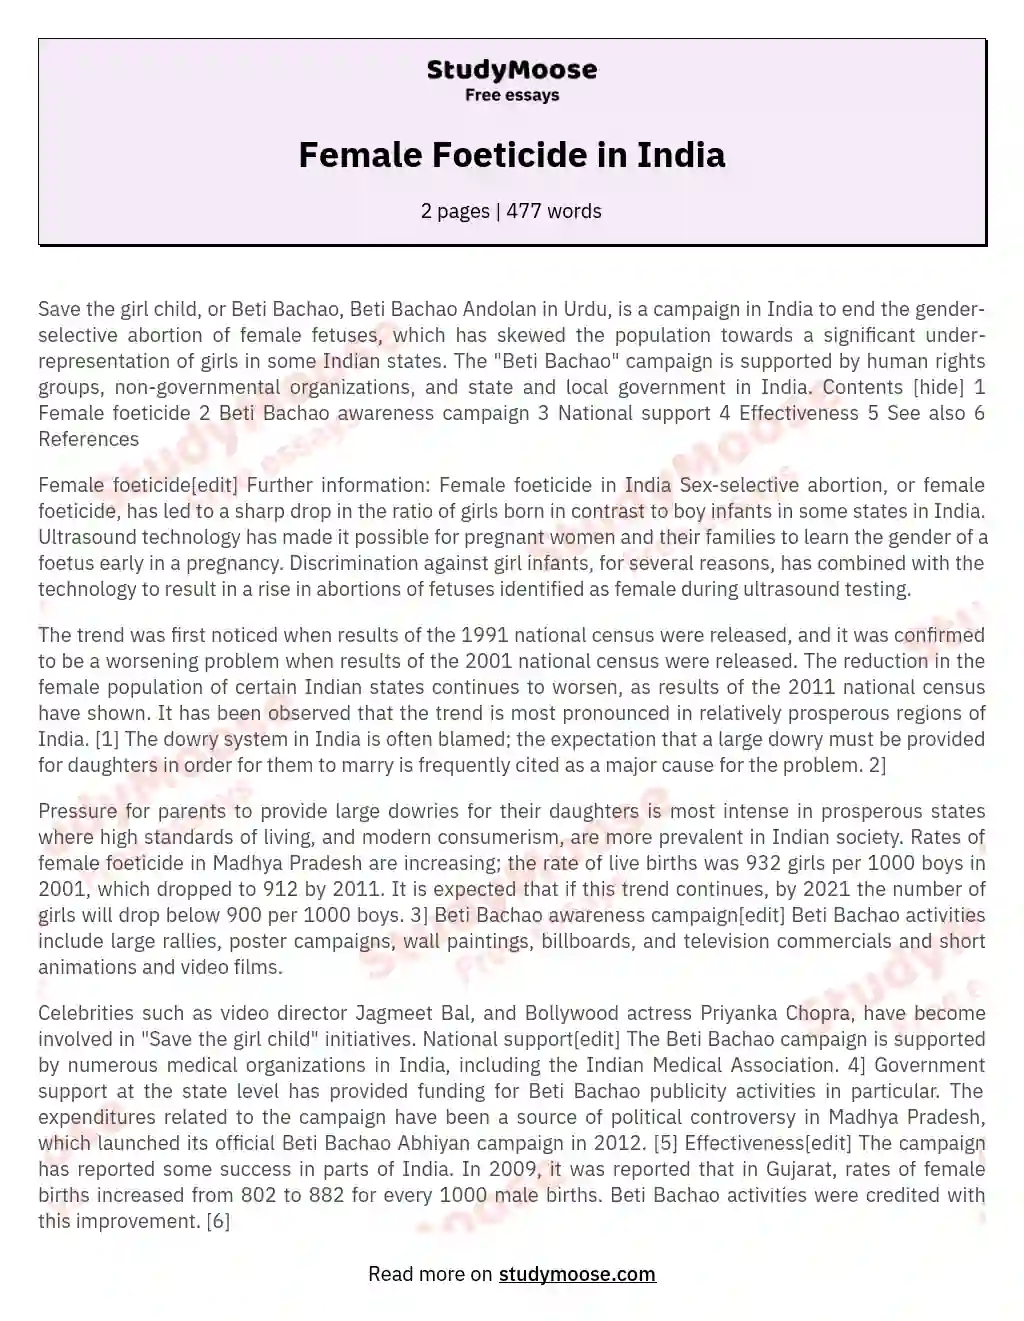 female foeticide essay in 100 words